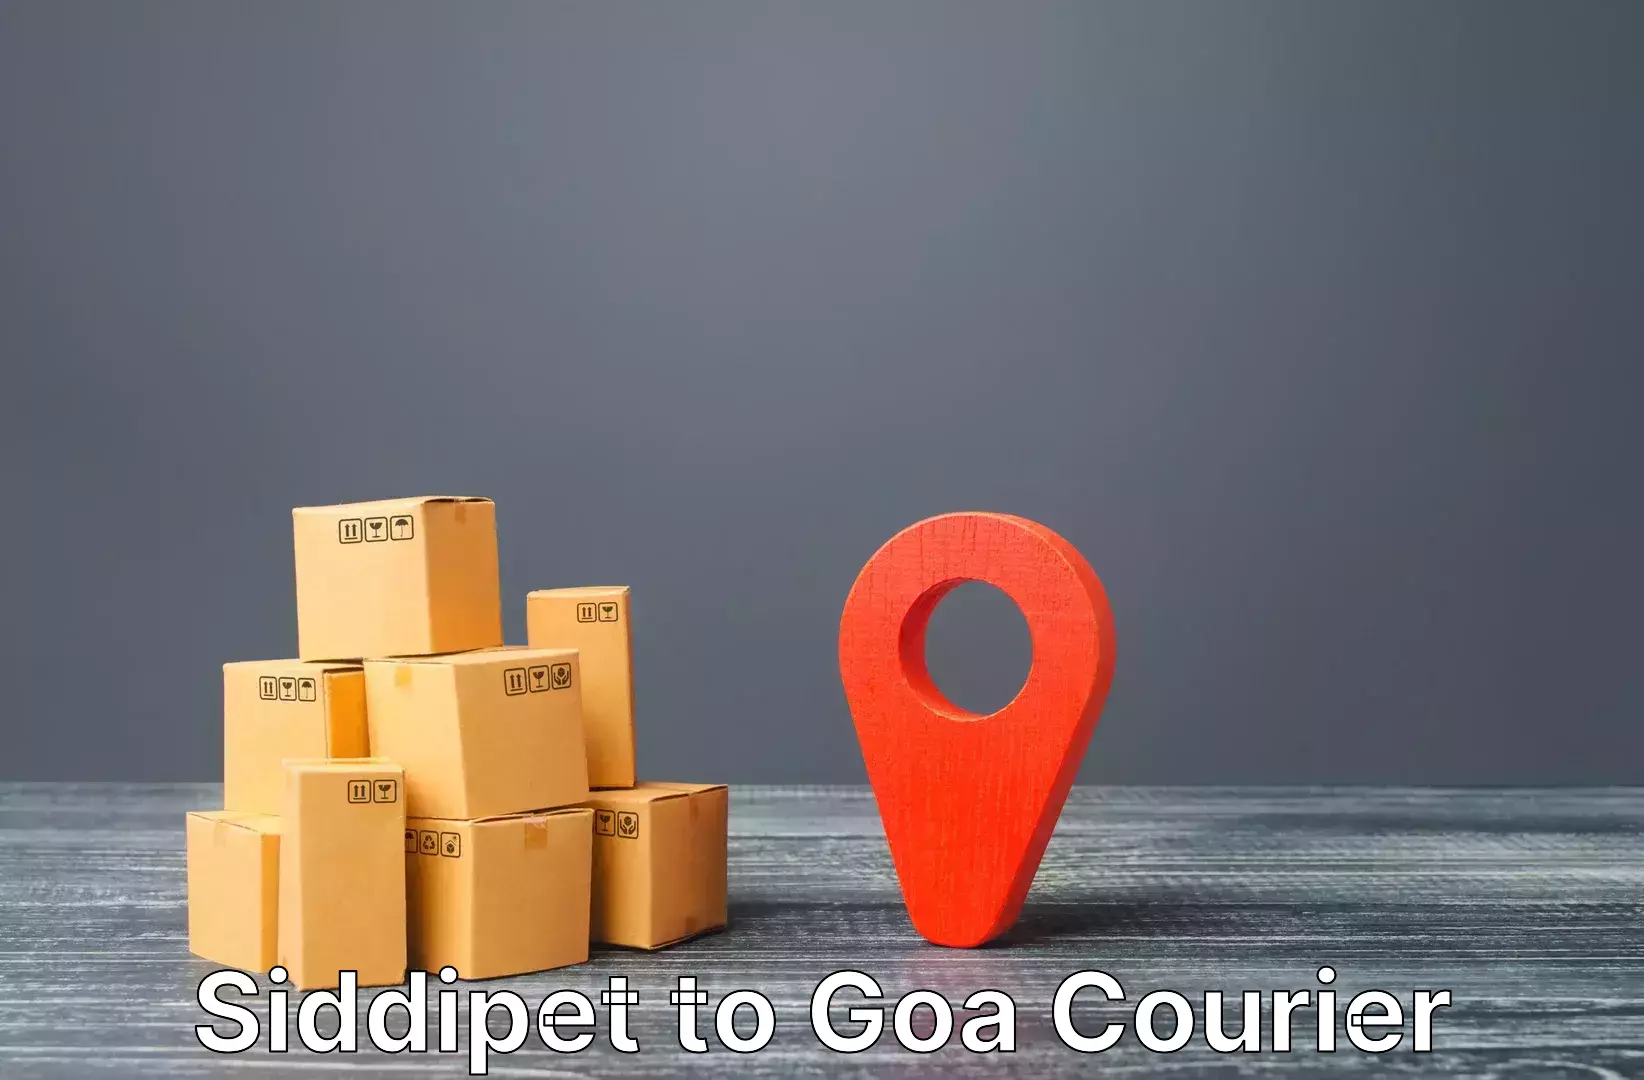 Luggage delivery app Siddipet to Panaji